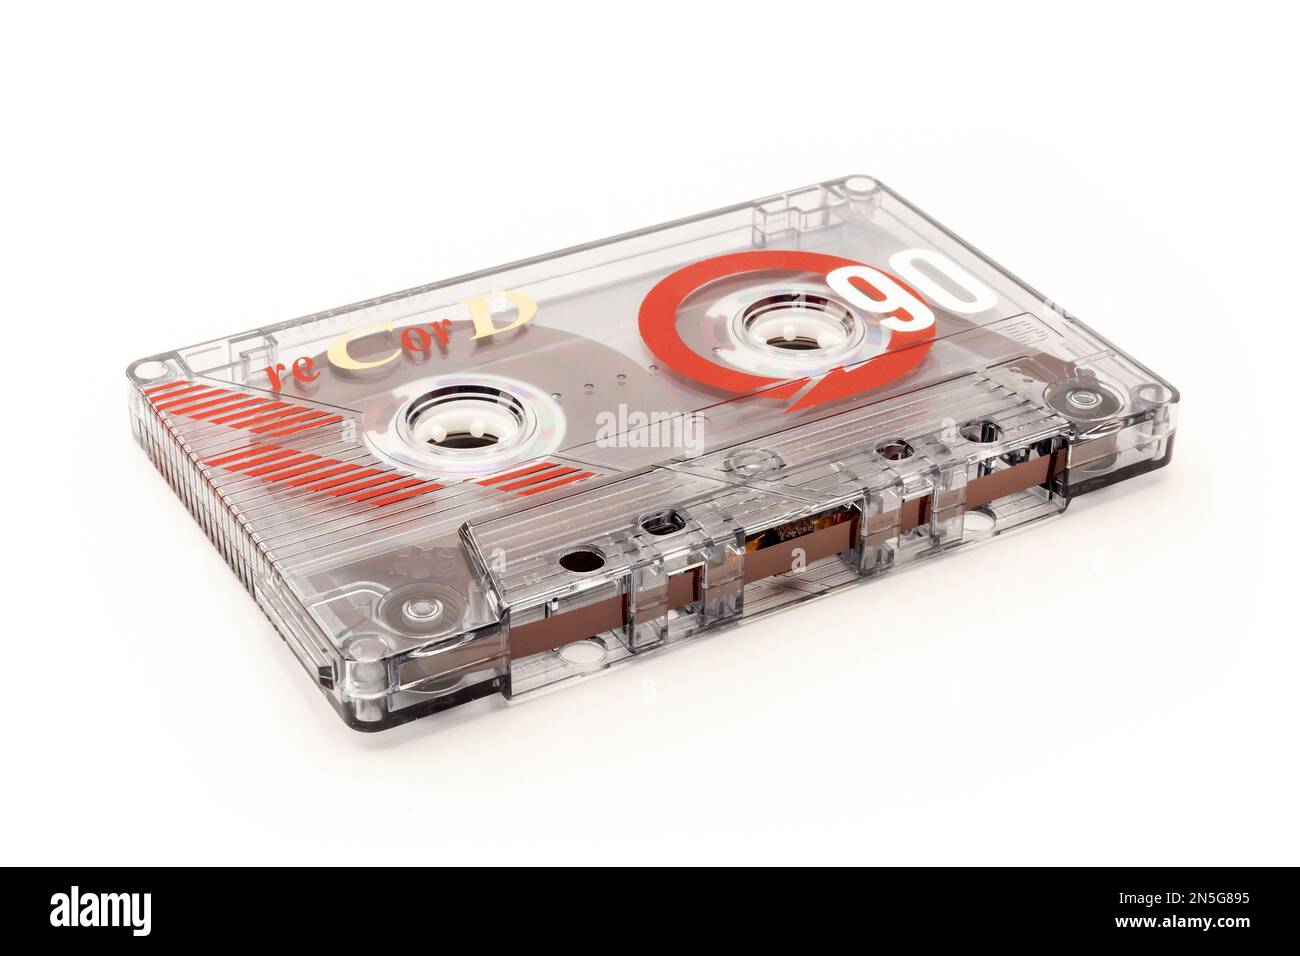 Audio cassette tape - old vintage compact audio cassette on its side isolated on white background, bottom view Stock Photo